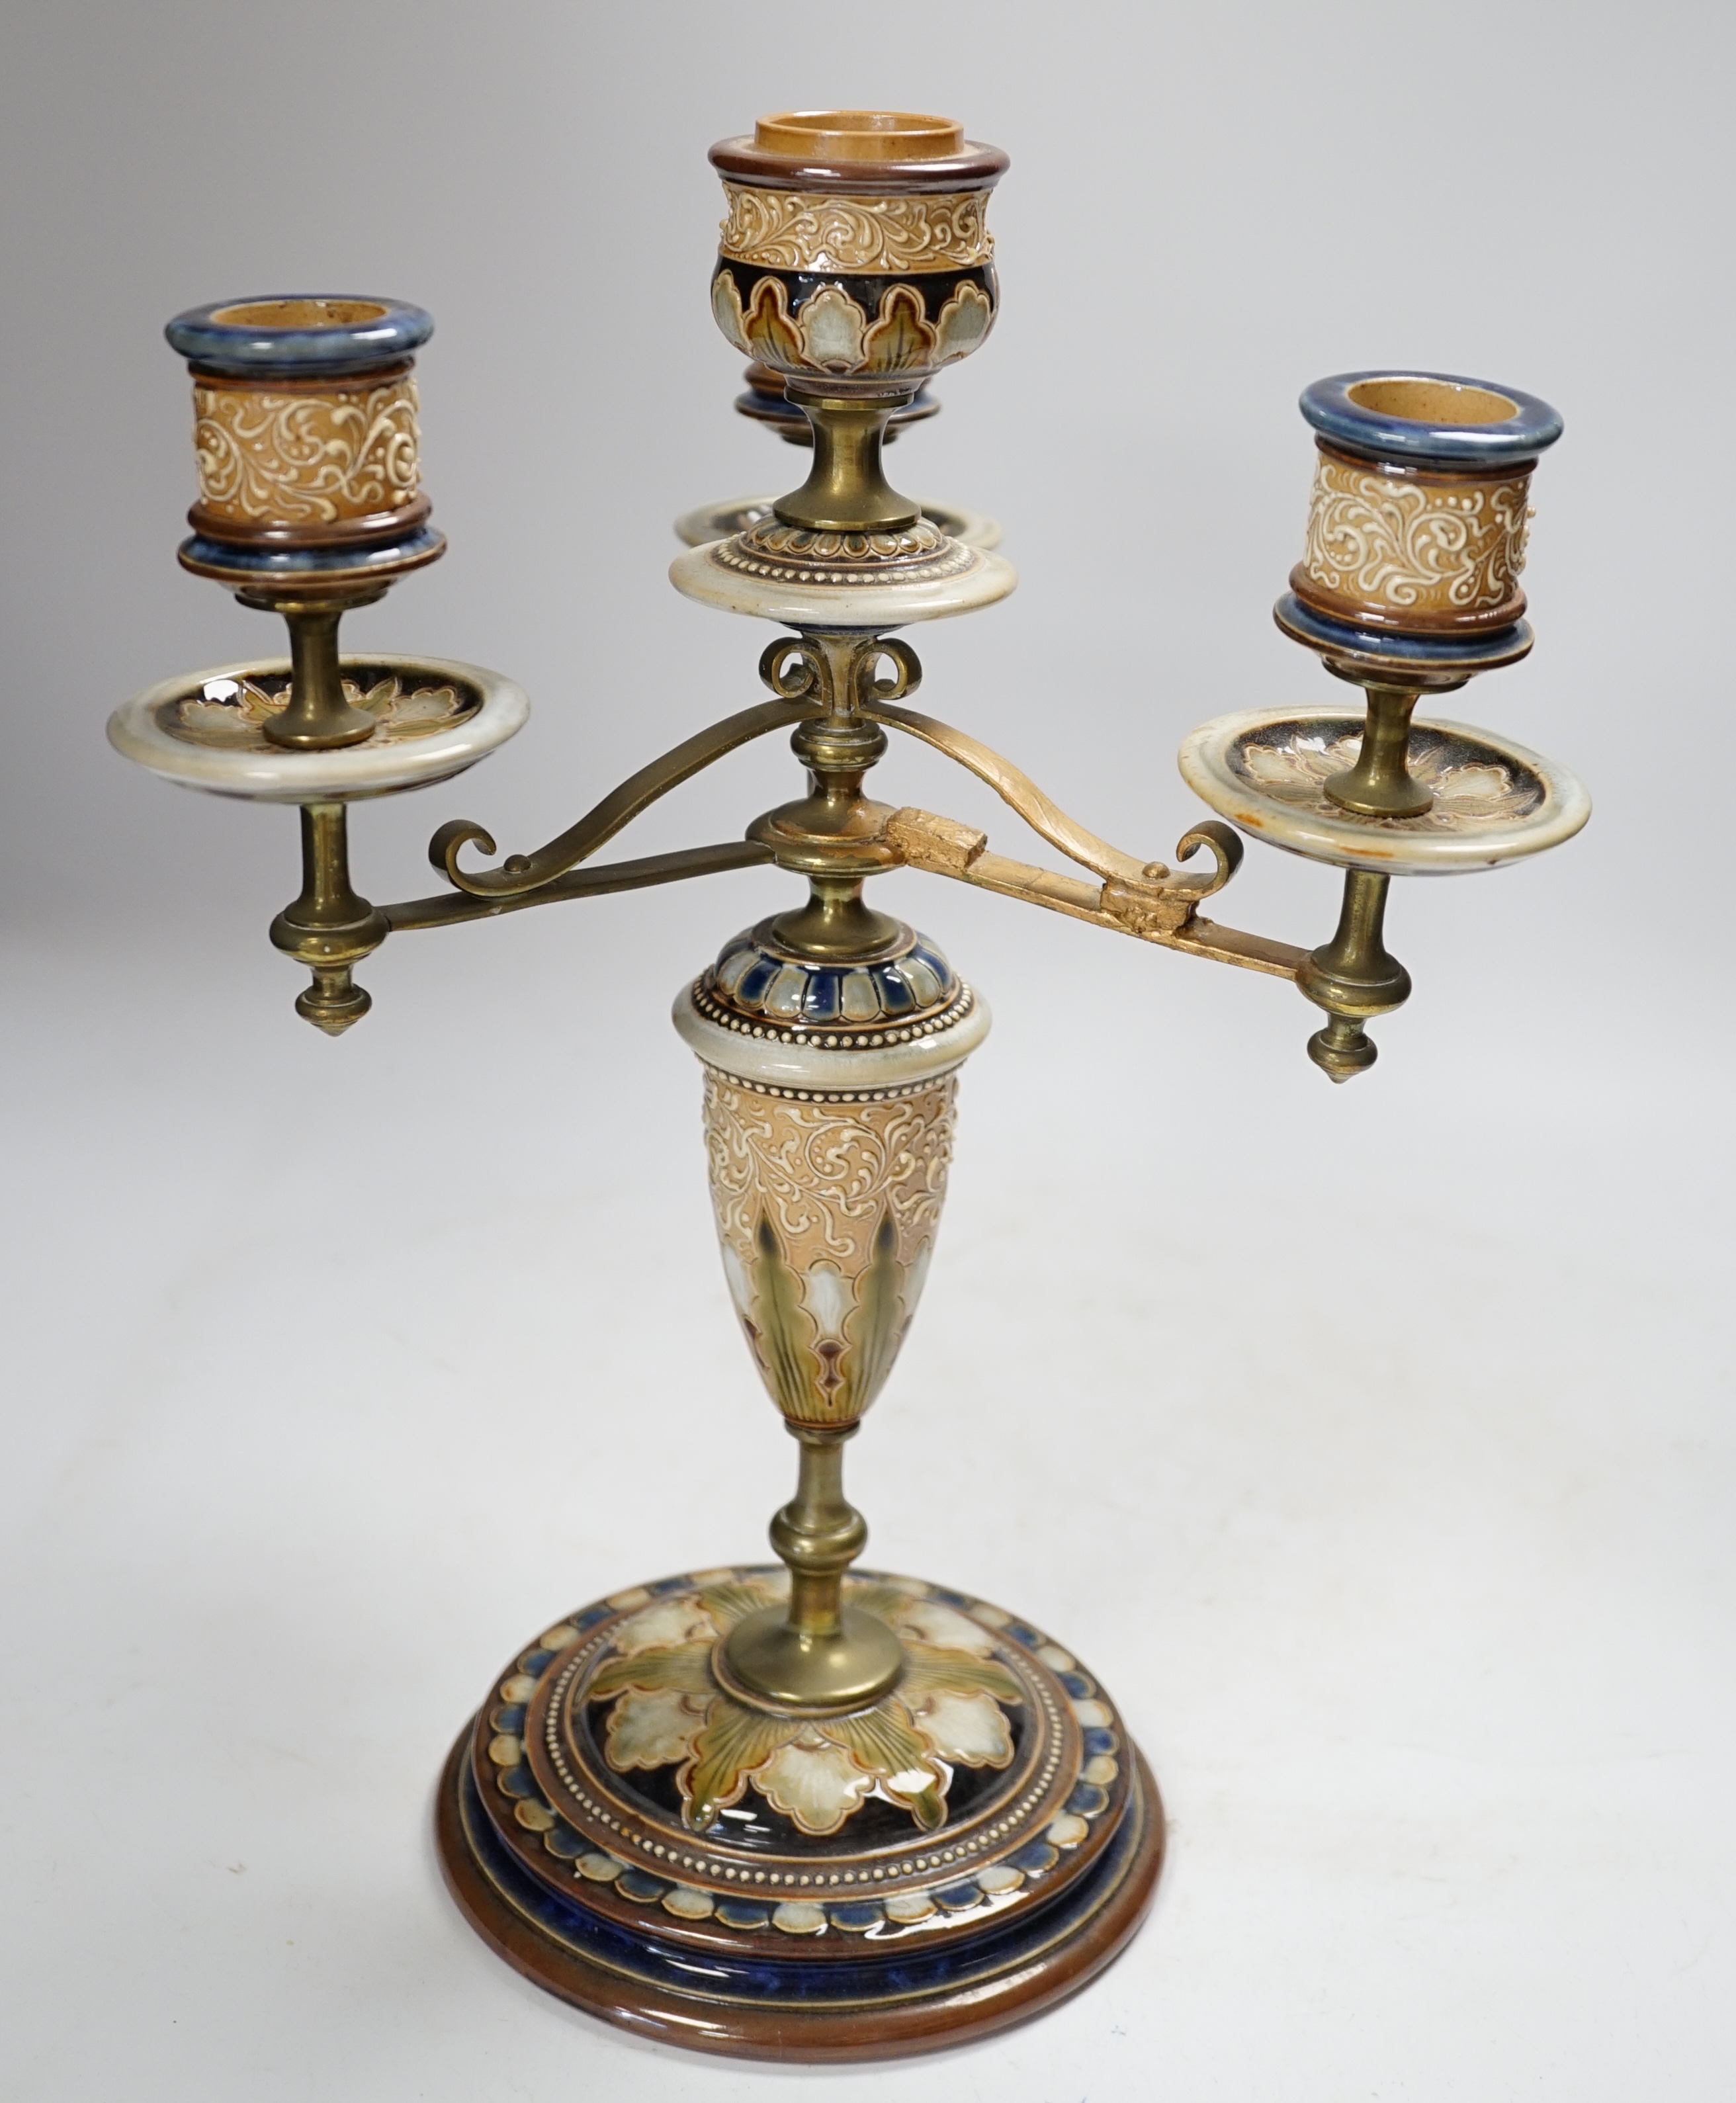 A Royal Doulton three branch four light candelabra, Eliza Simmance, 33cm high, Condition - poor to fair, one arm restored